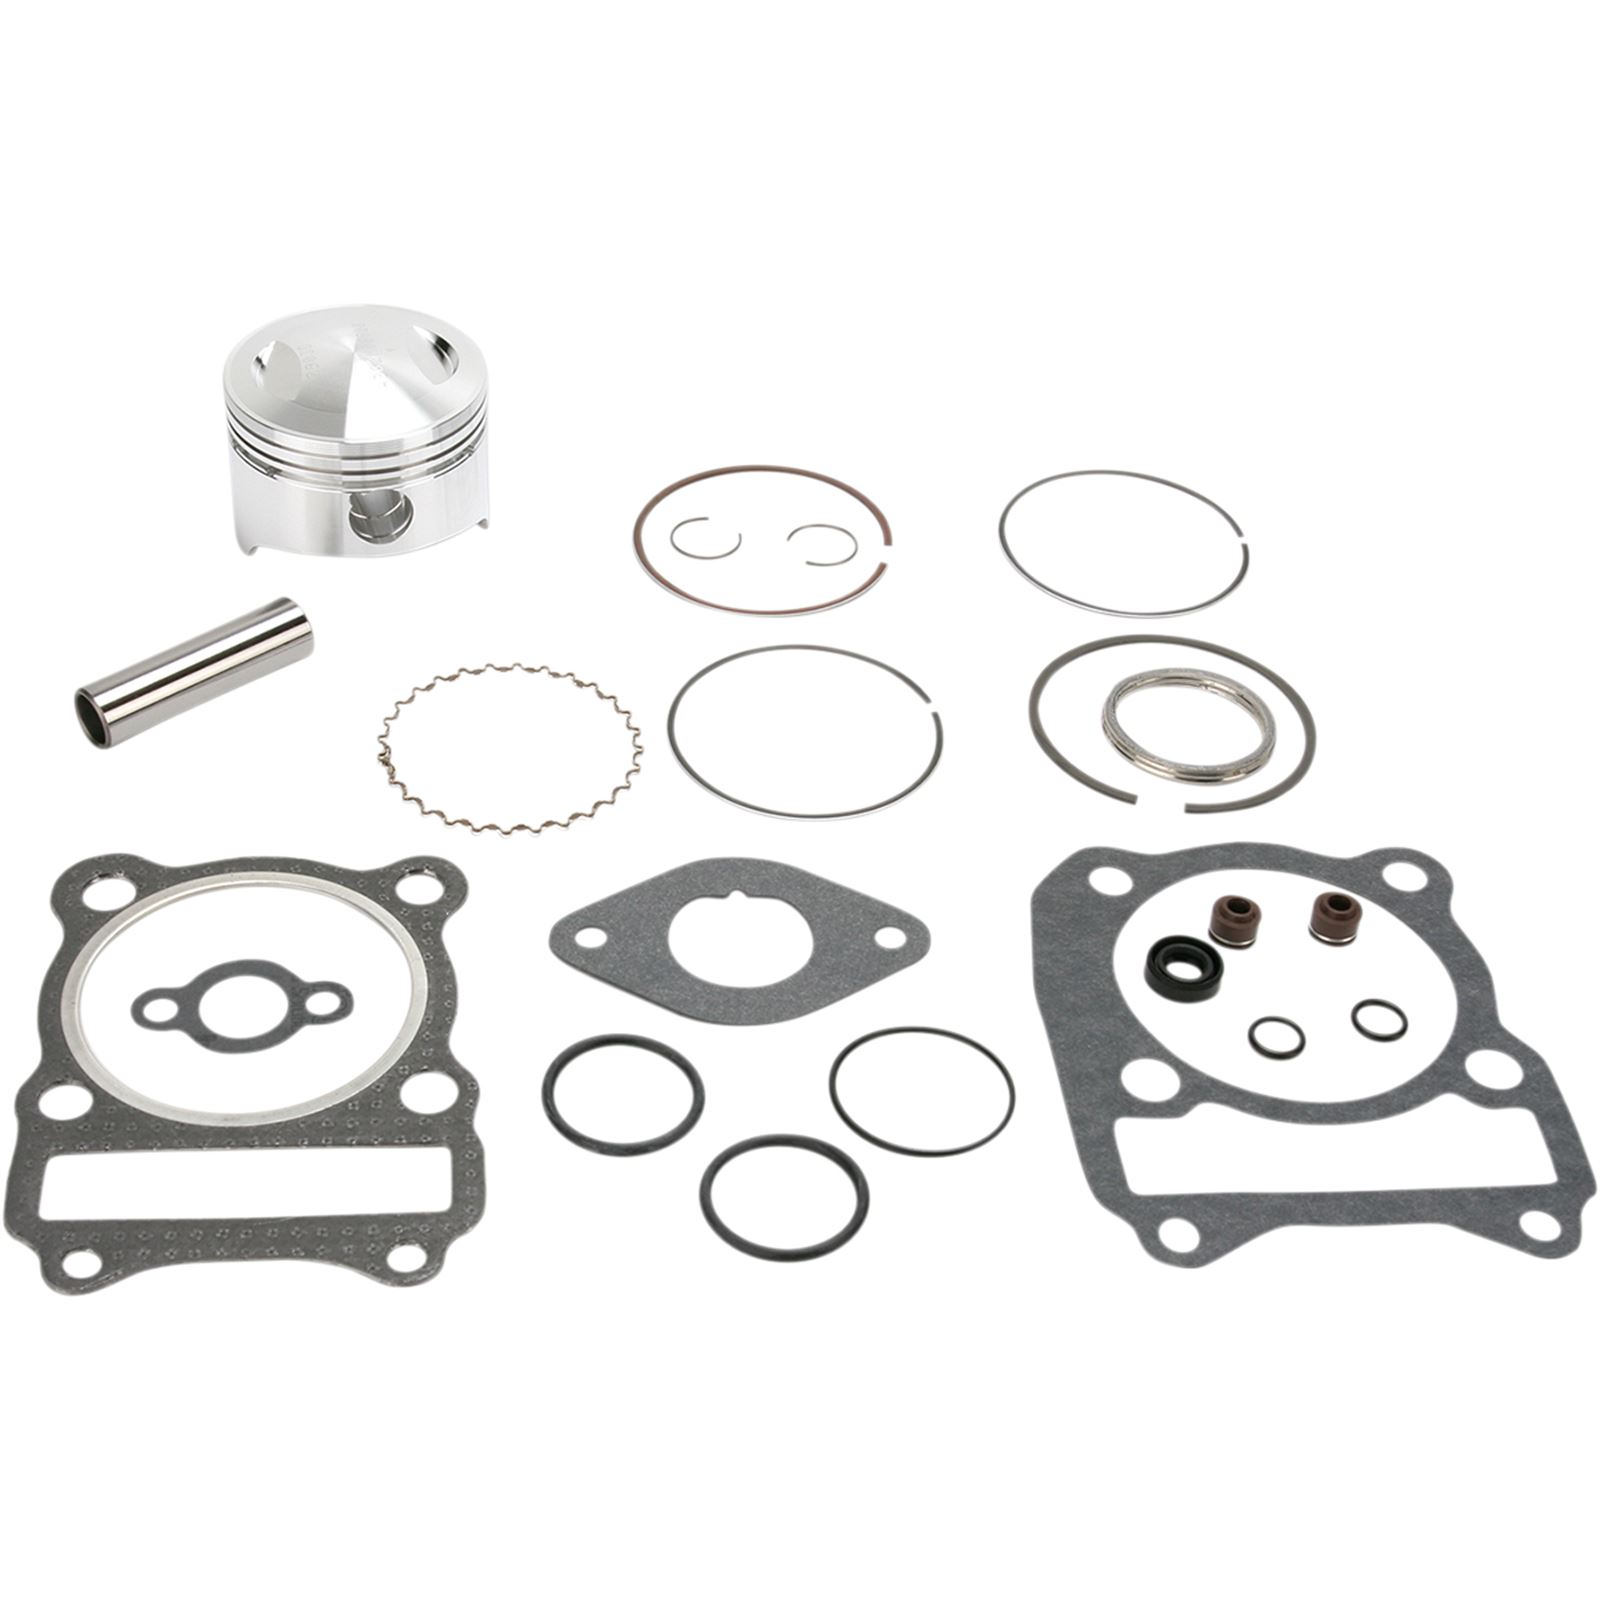 Wiseco Piston Kit with Gaskets